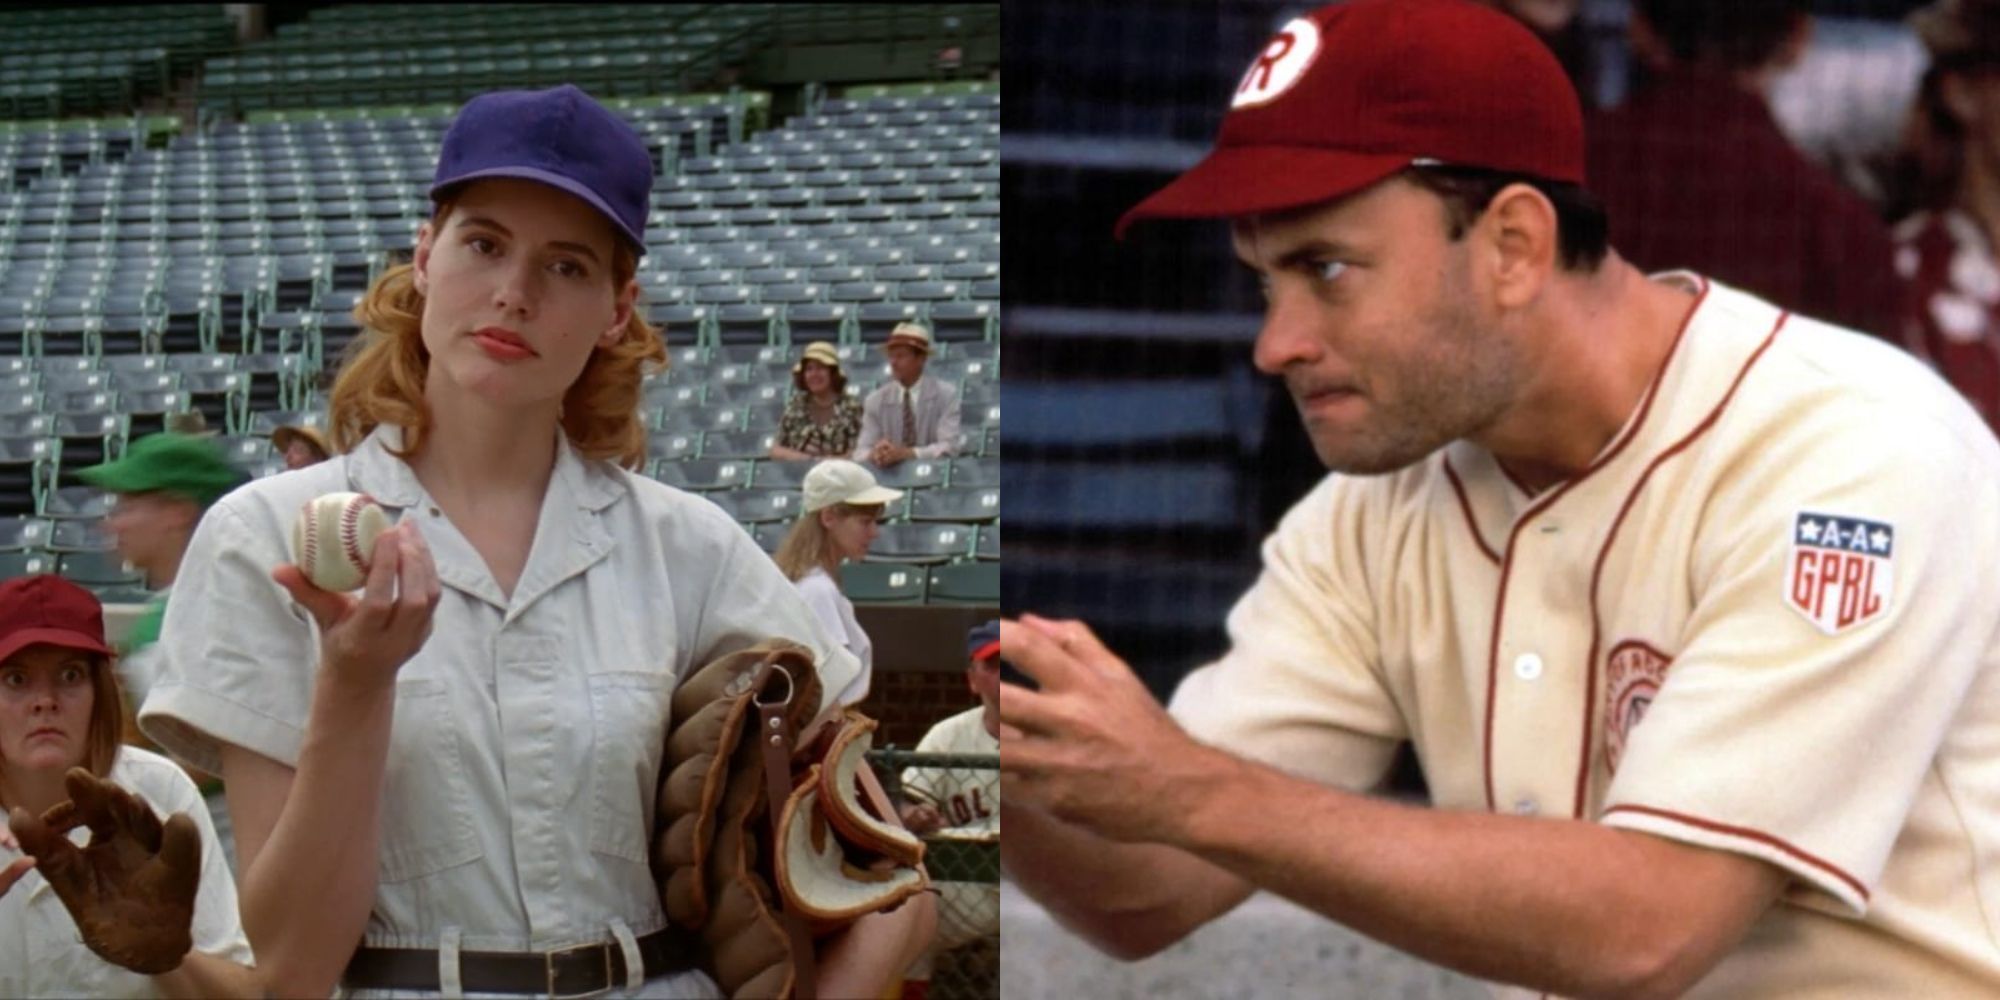 Split image showing Dottie and Jimmy in A League of Their Own.